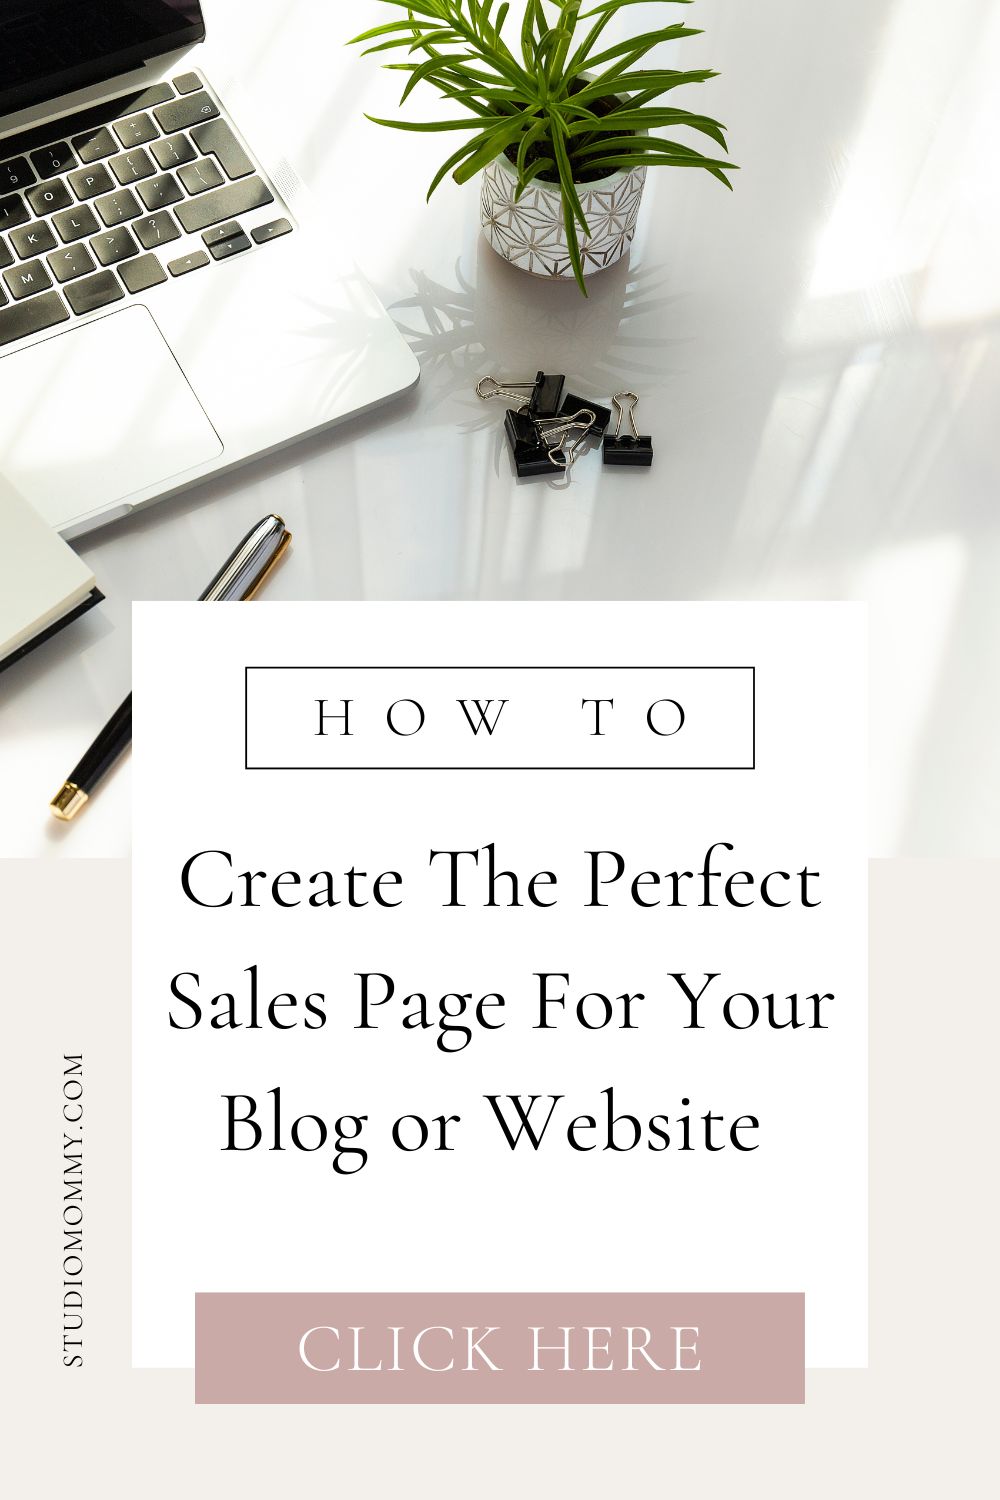 Create the perfect sales page